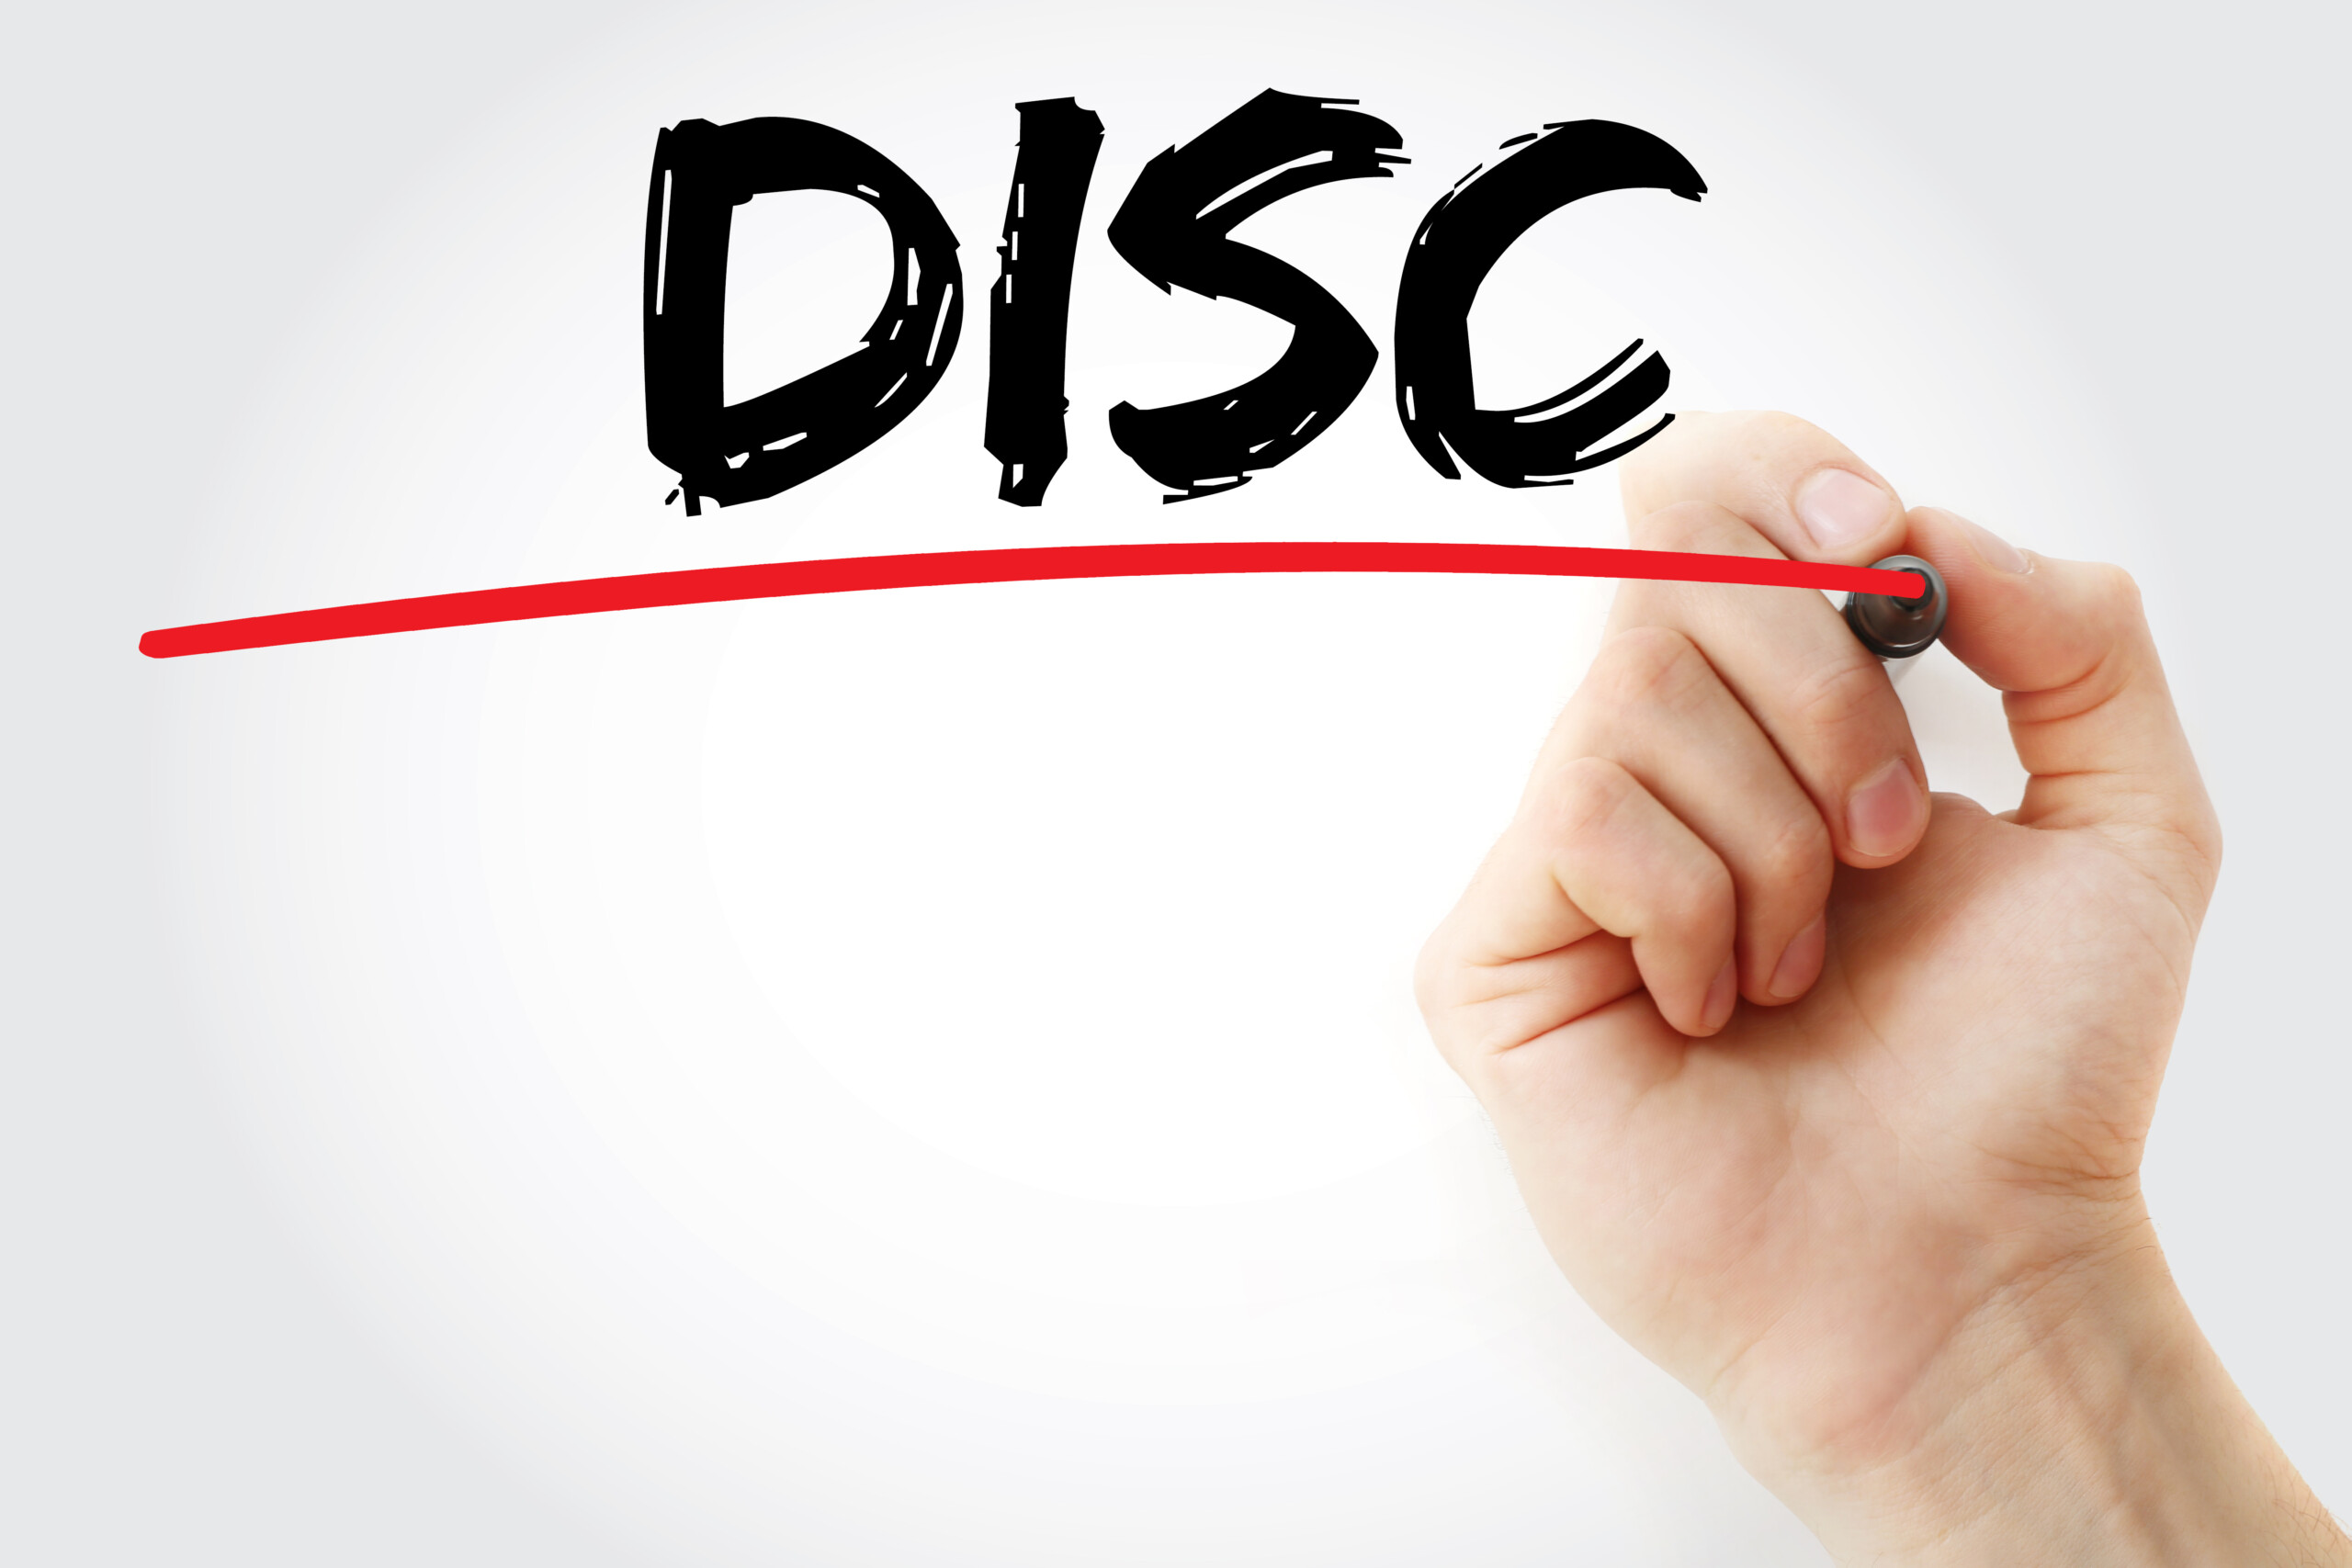 DISC profile cheat sheet for customer communication - increase sales!